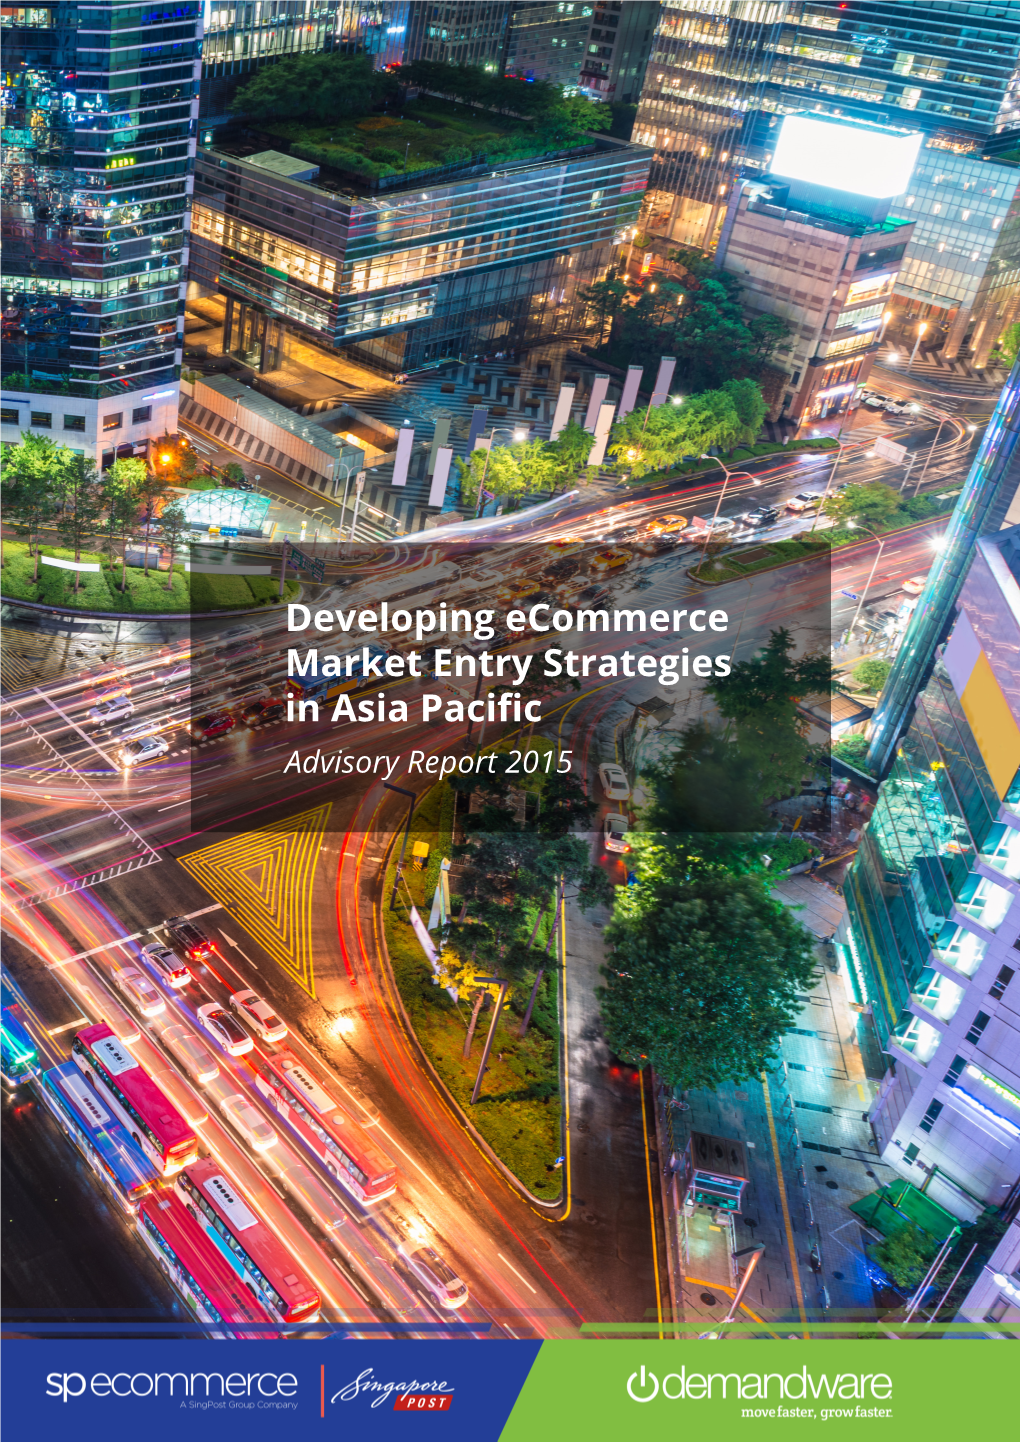 Developing Ecommerce Market Entry Strategies in Asia Pacific Advisory Report 2015 2 Developing Ecommerce Market Entry Strategies in Asia Pacific, Advisory Report 2015